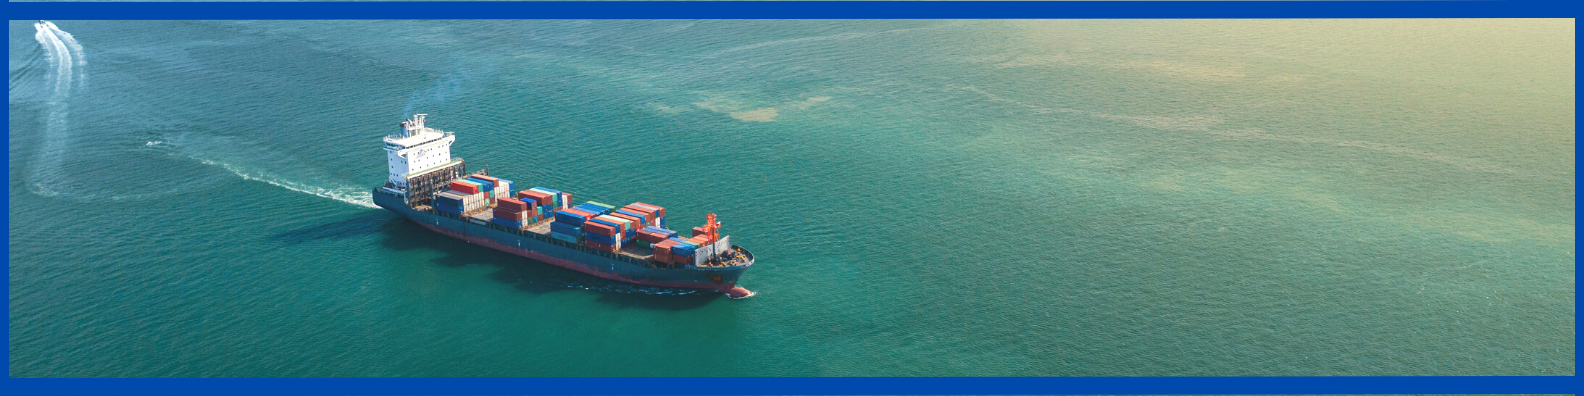 The Regional Marine Pollution Emergency Response Centre for the Mediterranean Sea (REMPEC) assists the Mediterranean coastal States in ratifying, transposing, implementing and enforcing international maritime conventions.